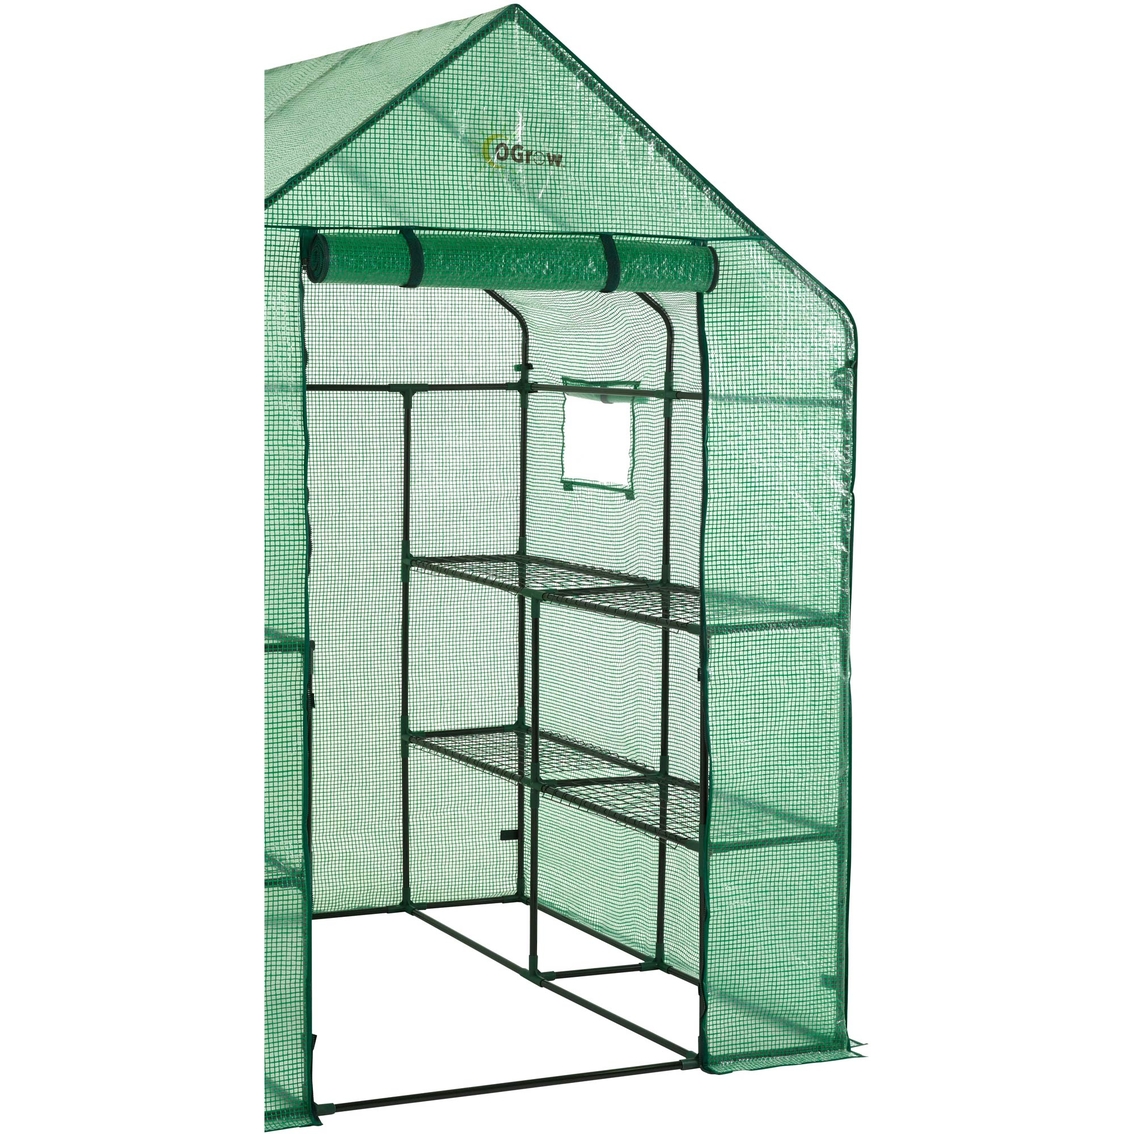 Ogrow Deluxe Walk In 2 Tier 8 Shelf Portable Lawn and Garden Greenhouse - Image 3 of 7